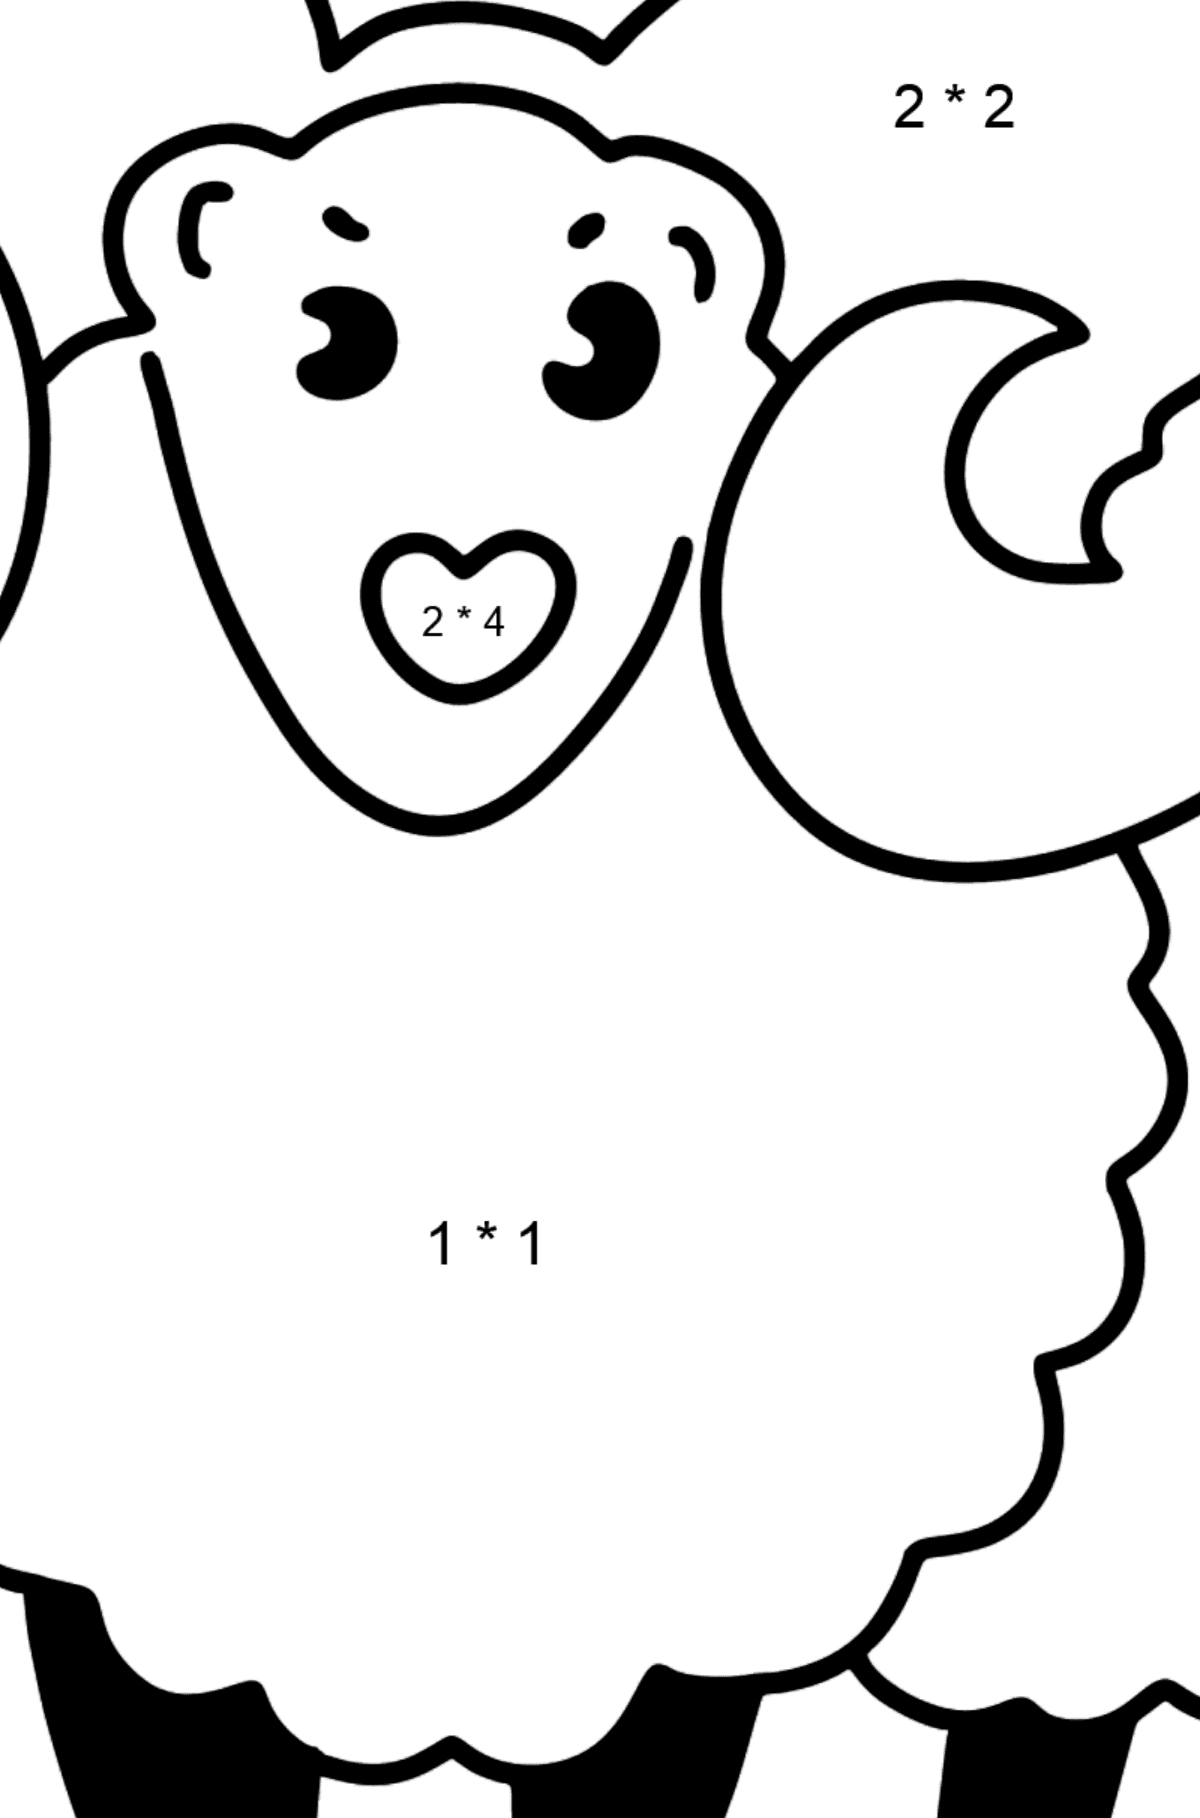 Home Lamb coloring page - Math Coloring - Multiplication for Kids